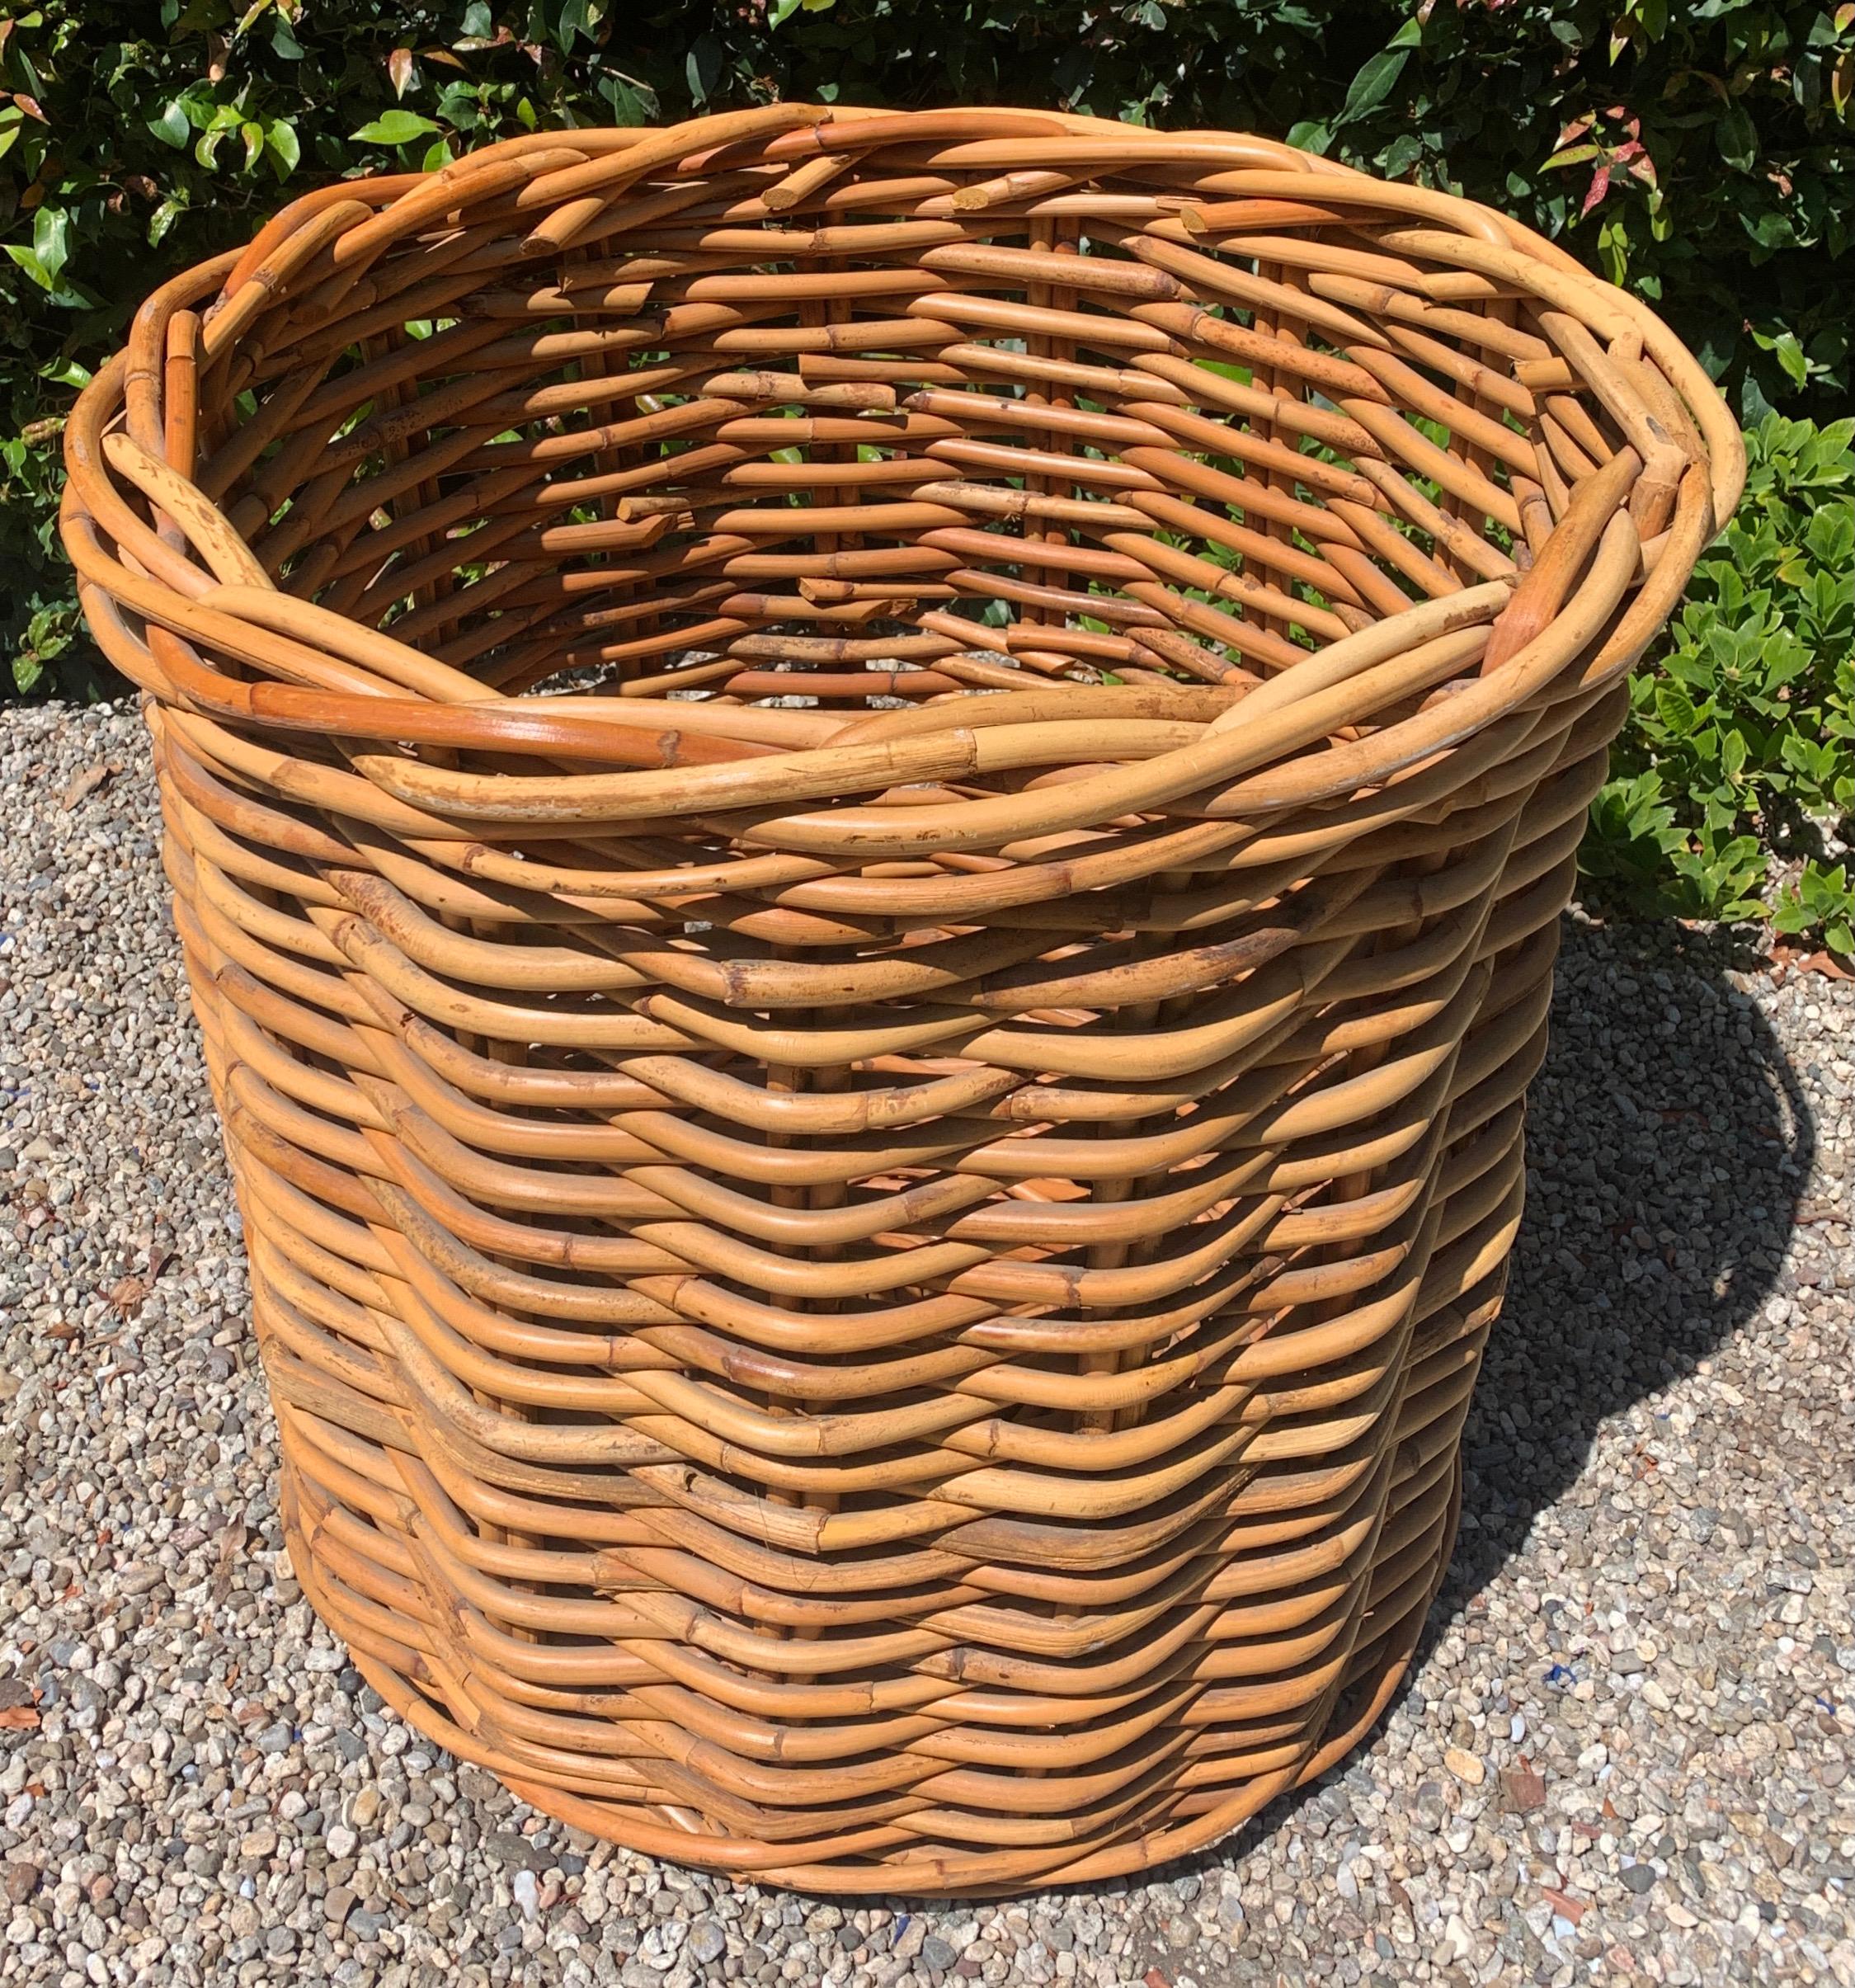 A monumental Rattan Basket. A nicely woven, in very good condition, pencil rattan basket. This piece is huge - well suited for firewood, laundry or games, balls, bats, toys. The basket is substantial and sturdy. A compliment to the mud room, or play